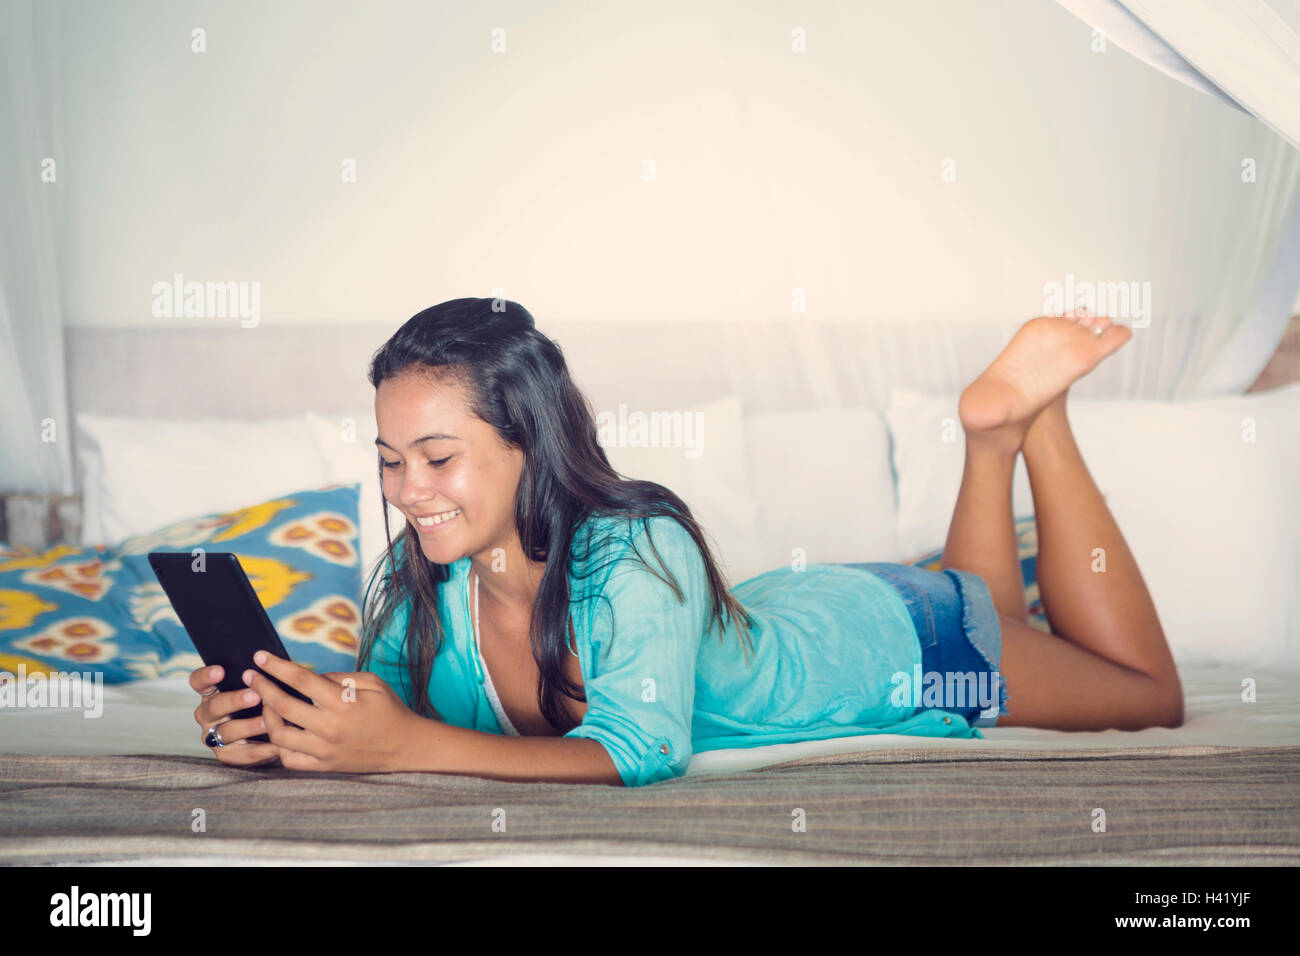 Mixed Race girl laying on bed reading digital tablet Stock Photo